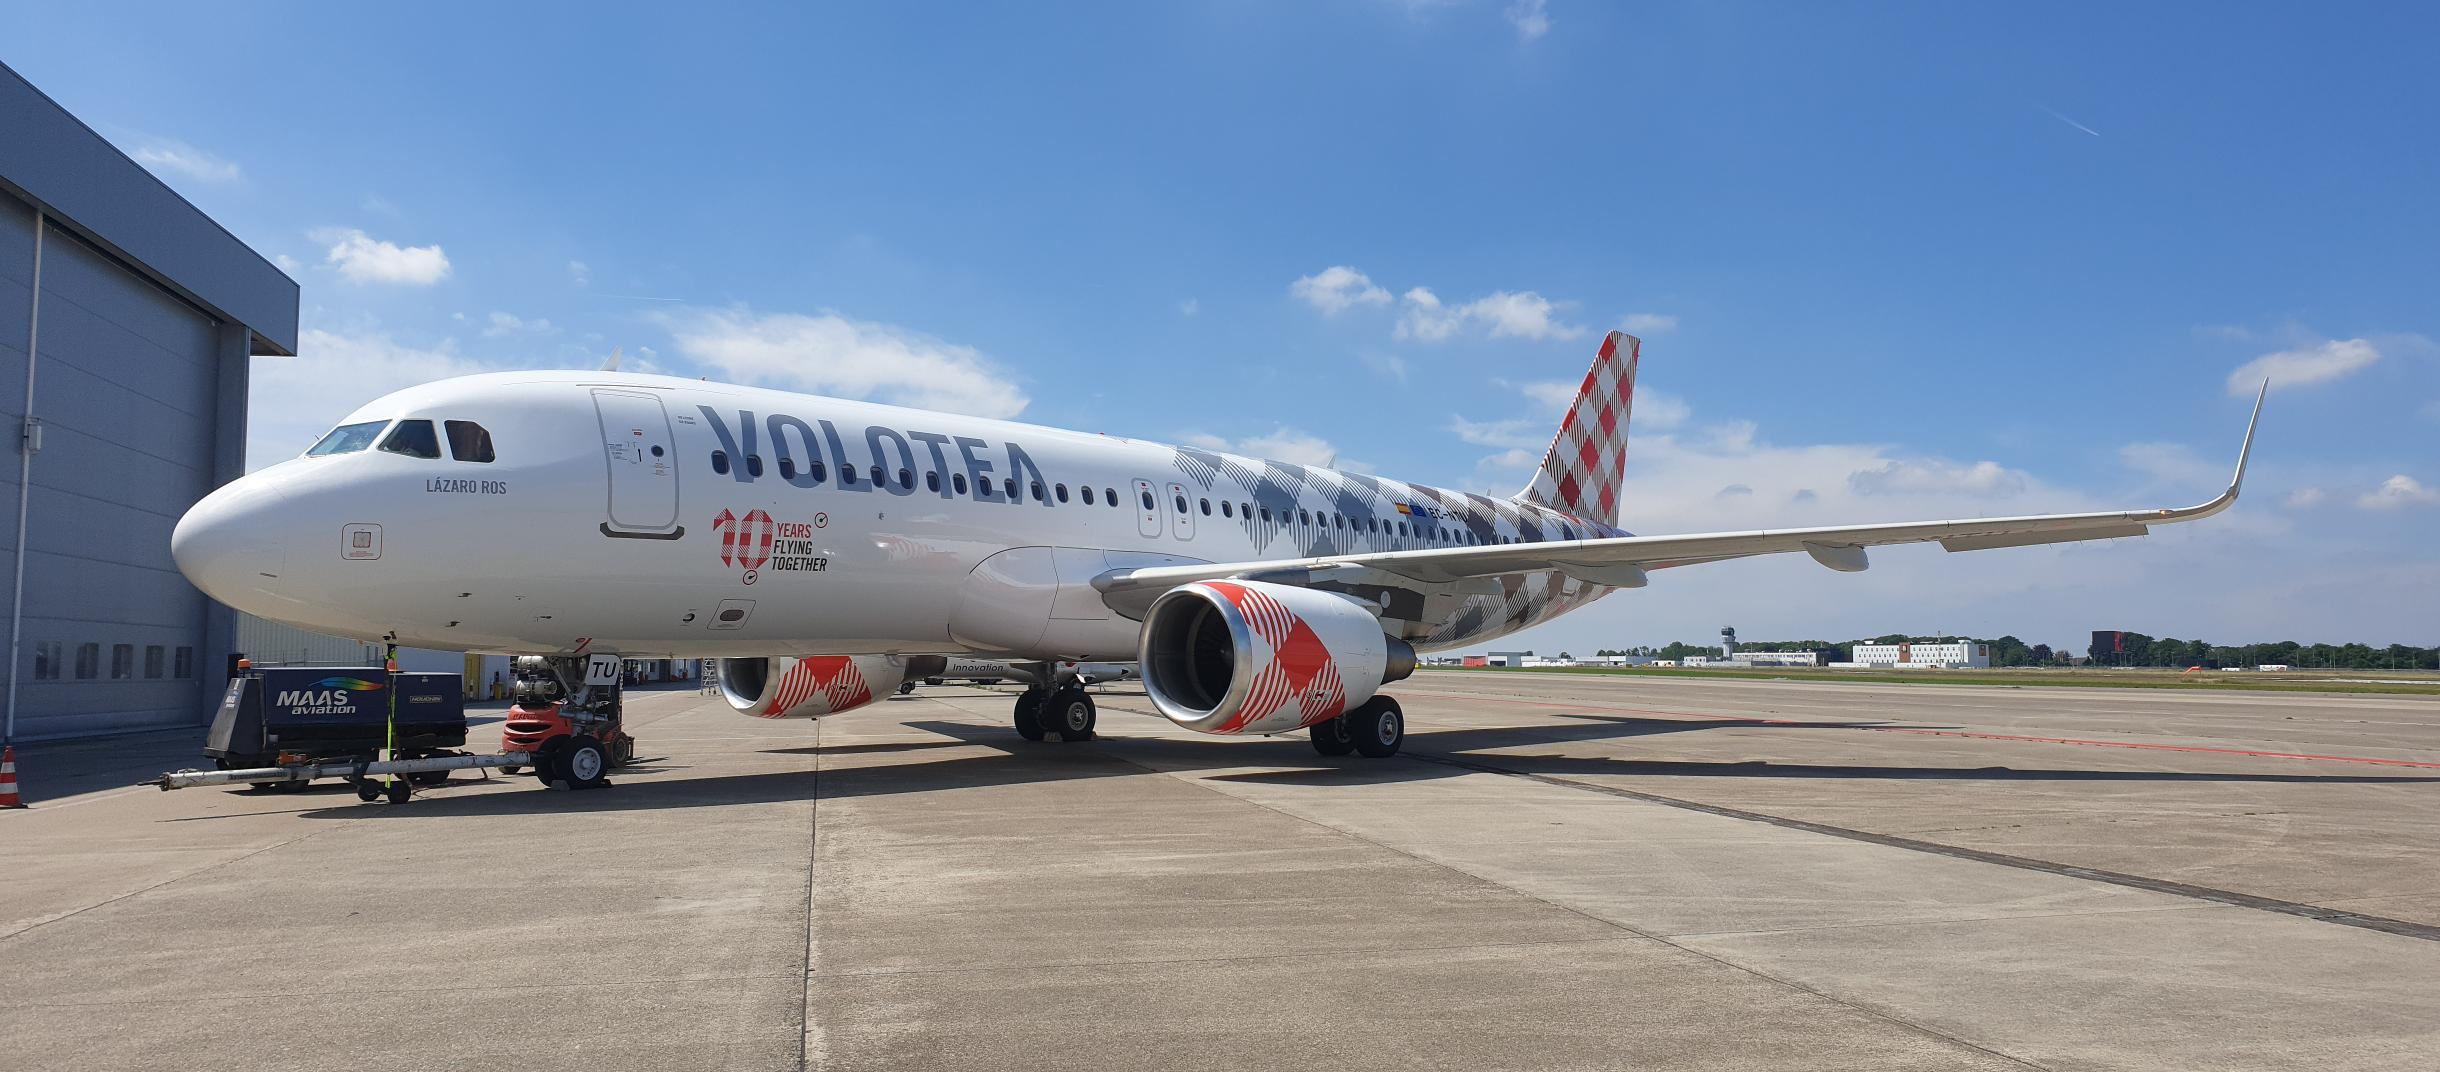 AkzoNobel Coatings helps Volotea celebrate its 10th anniversary with bespoke livery